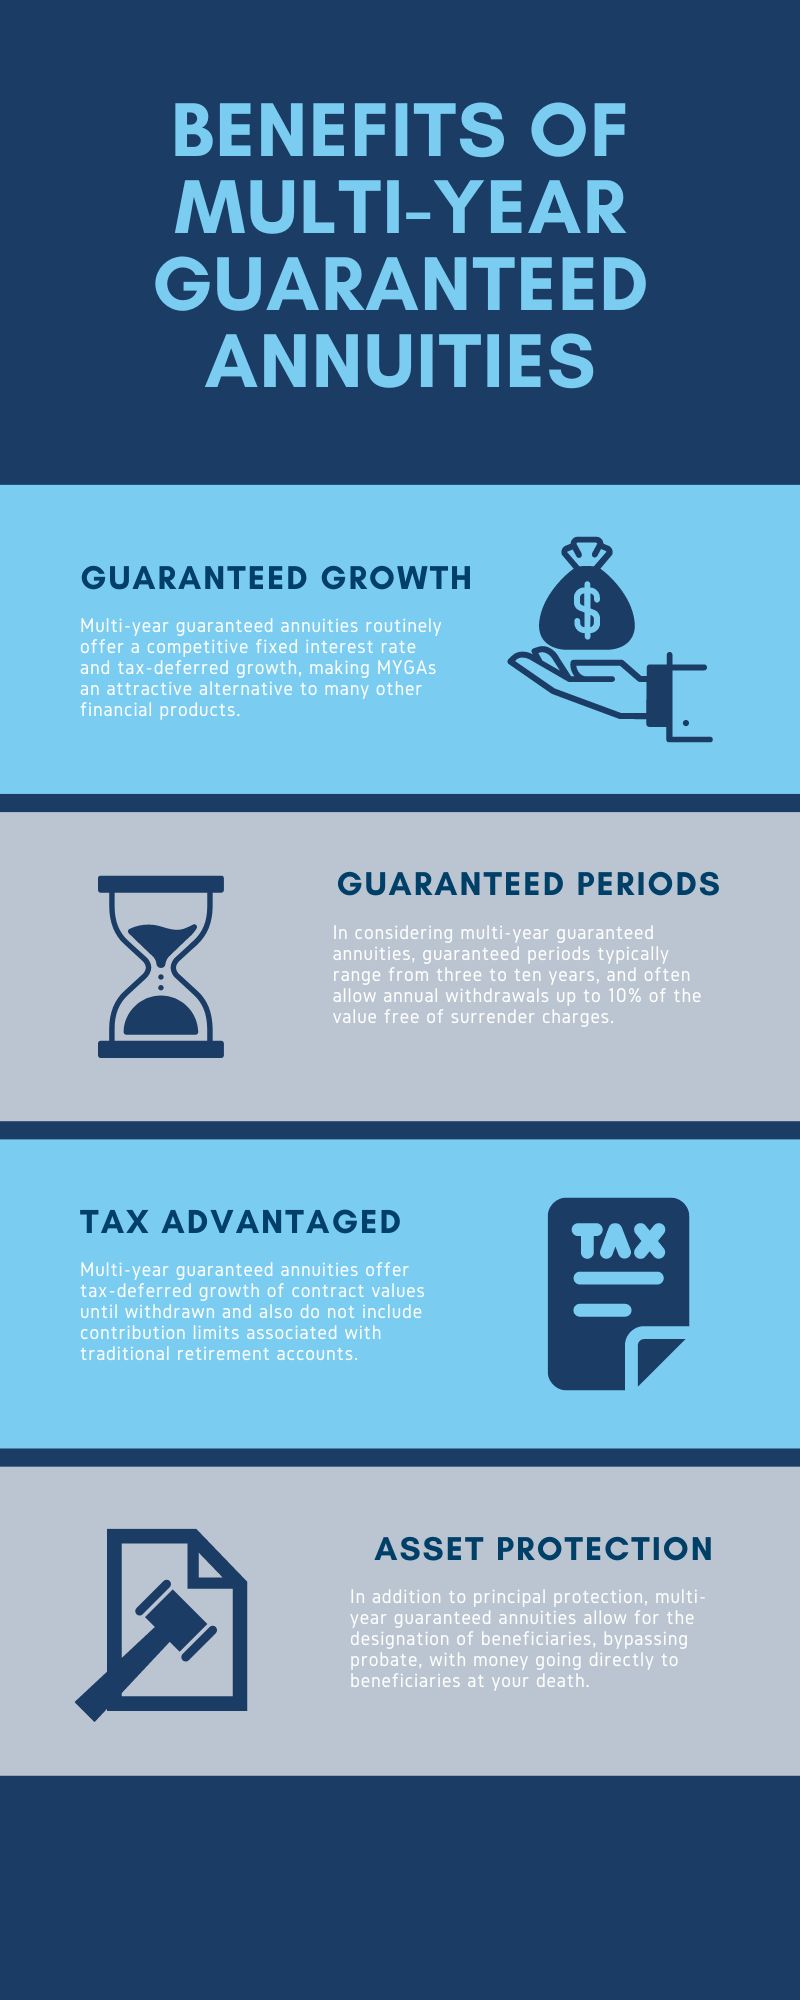 Benefits of Multi-Year Guaranteed Annuities infographic